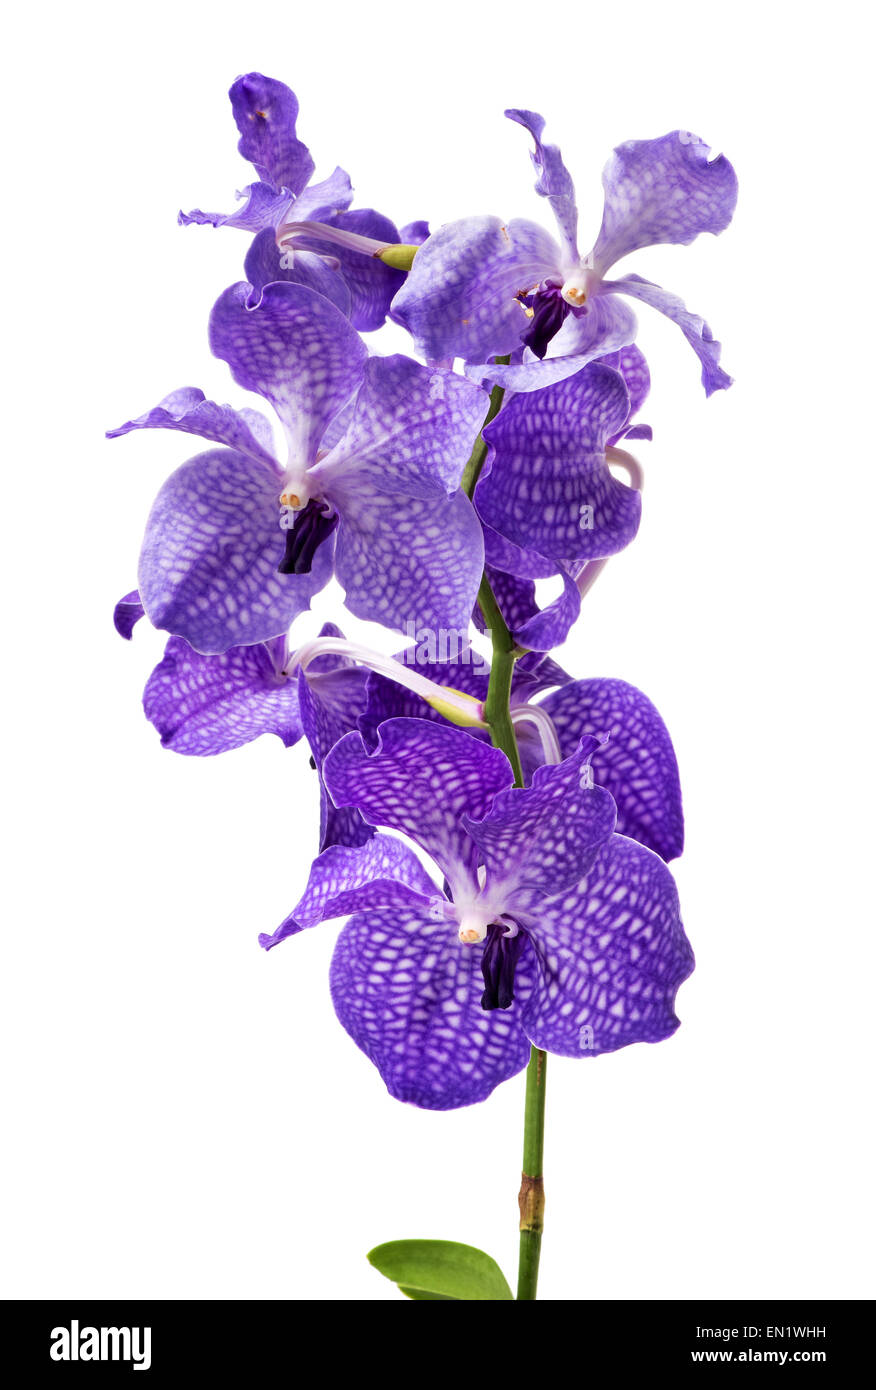 Close Up of Vibrant Colorful Purple Orchid Flowers Isolated on White Background Stock Photo